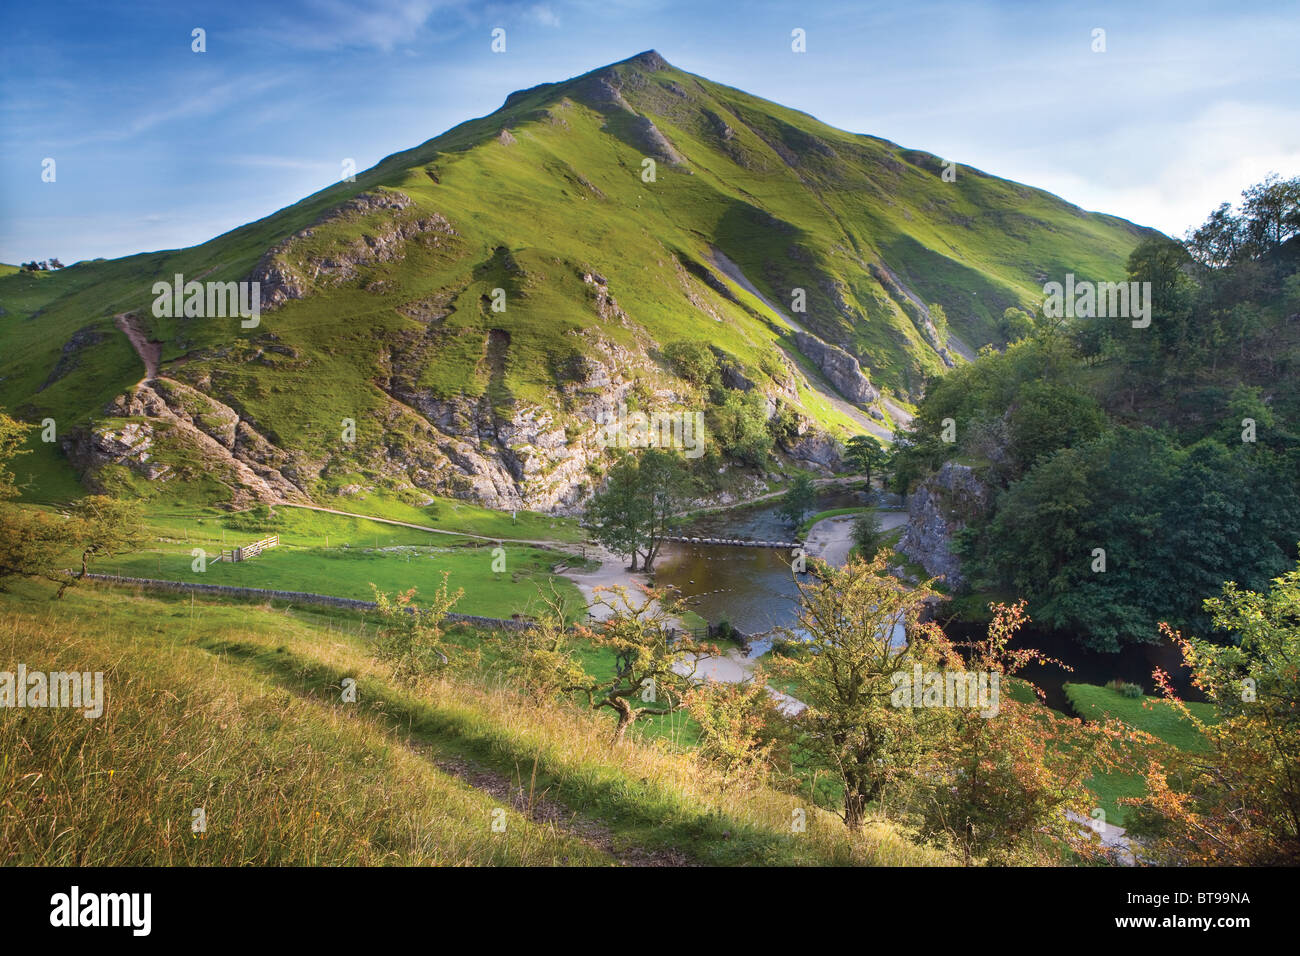 Dovedale with River Dove, stepping stones and the steep-sided Thorpe Cloud, Peak District National Park, Derbyshire, England, UK Stock Photo